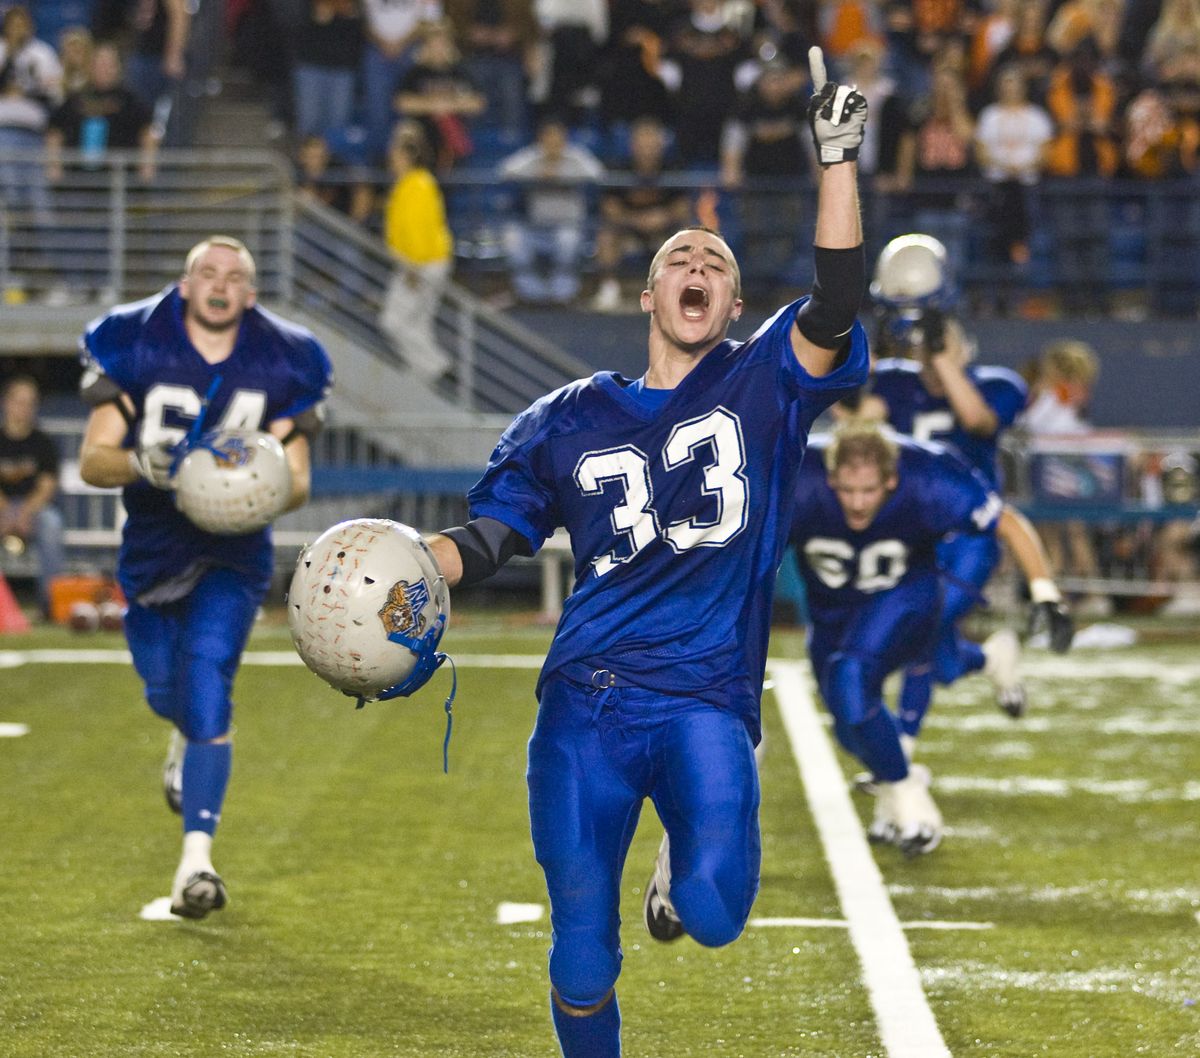 Garrett Blauert, after rushing for 295 yards, leads the celebration.  (Associated Press / The Spokesman-Review)